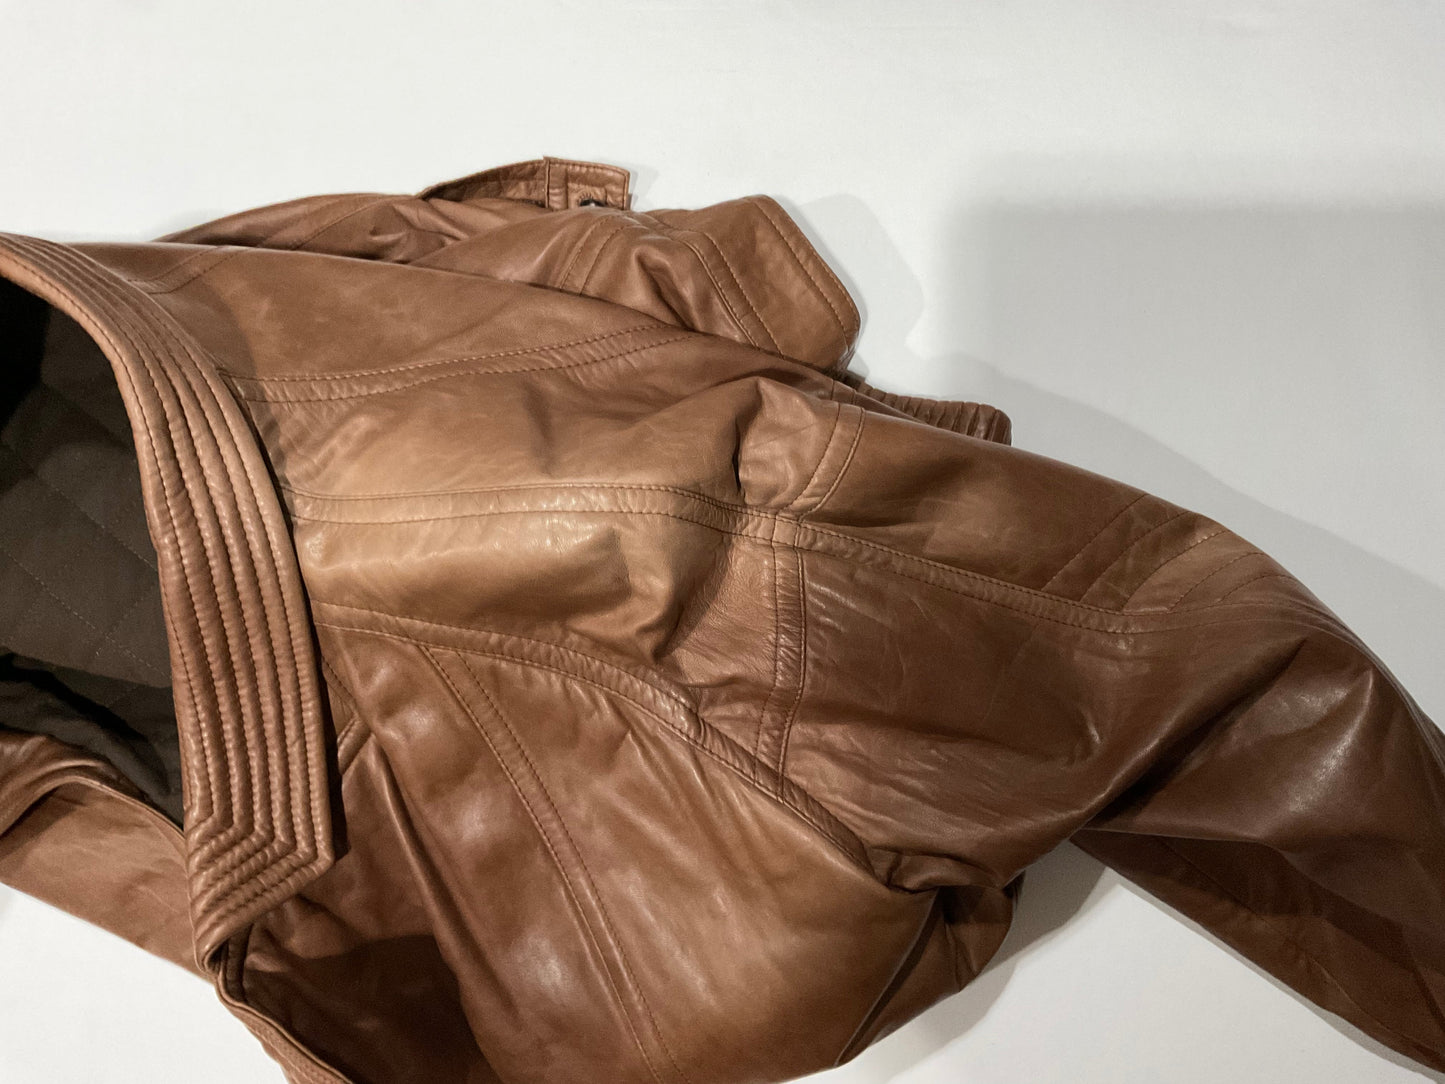 R P LEATHER JACKET / BROWN / MEDIUM / MADE IN ITALY